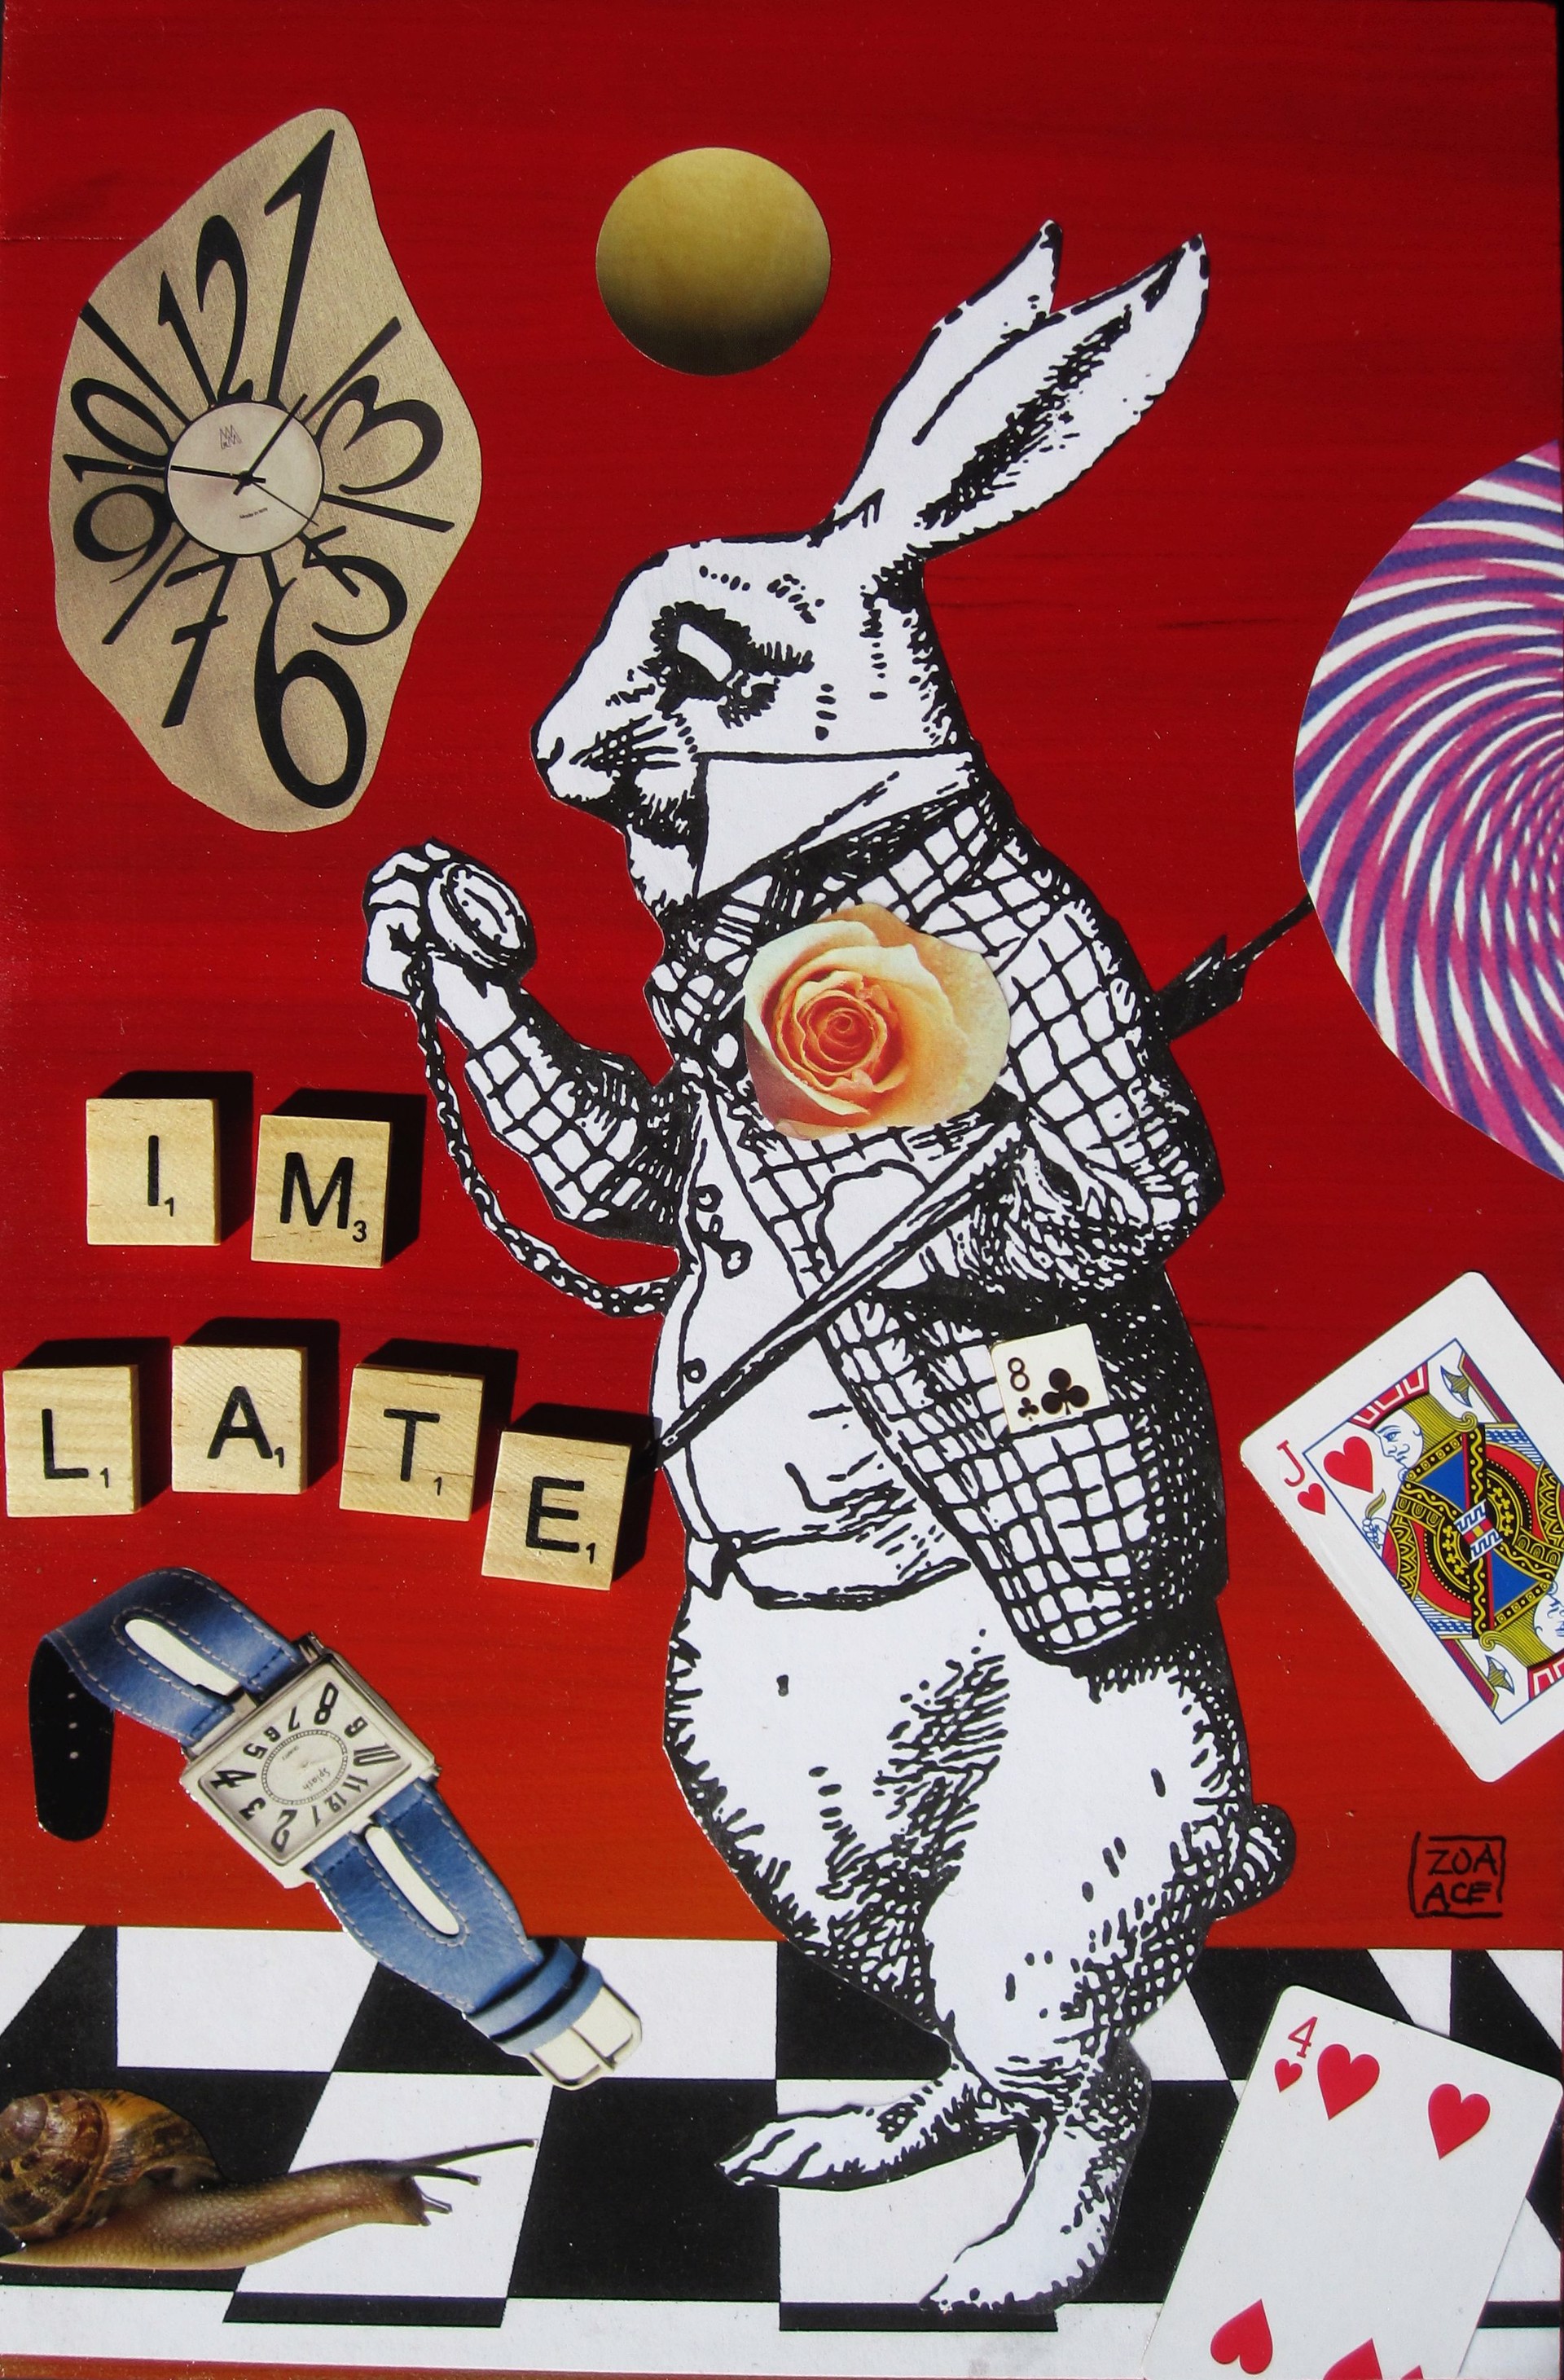 I'm Late by Zoa Ace